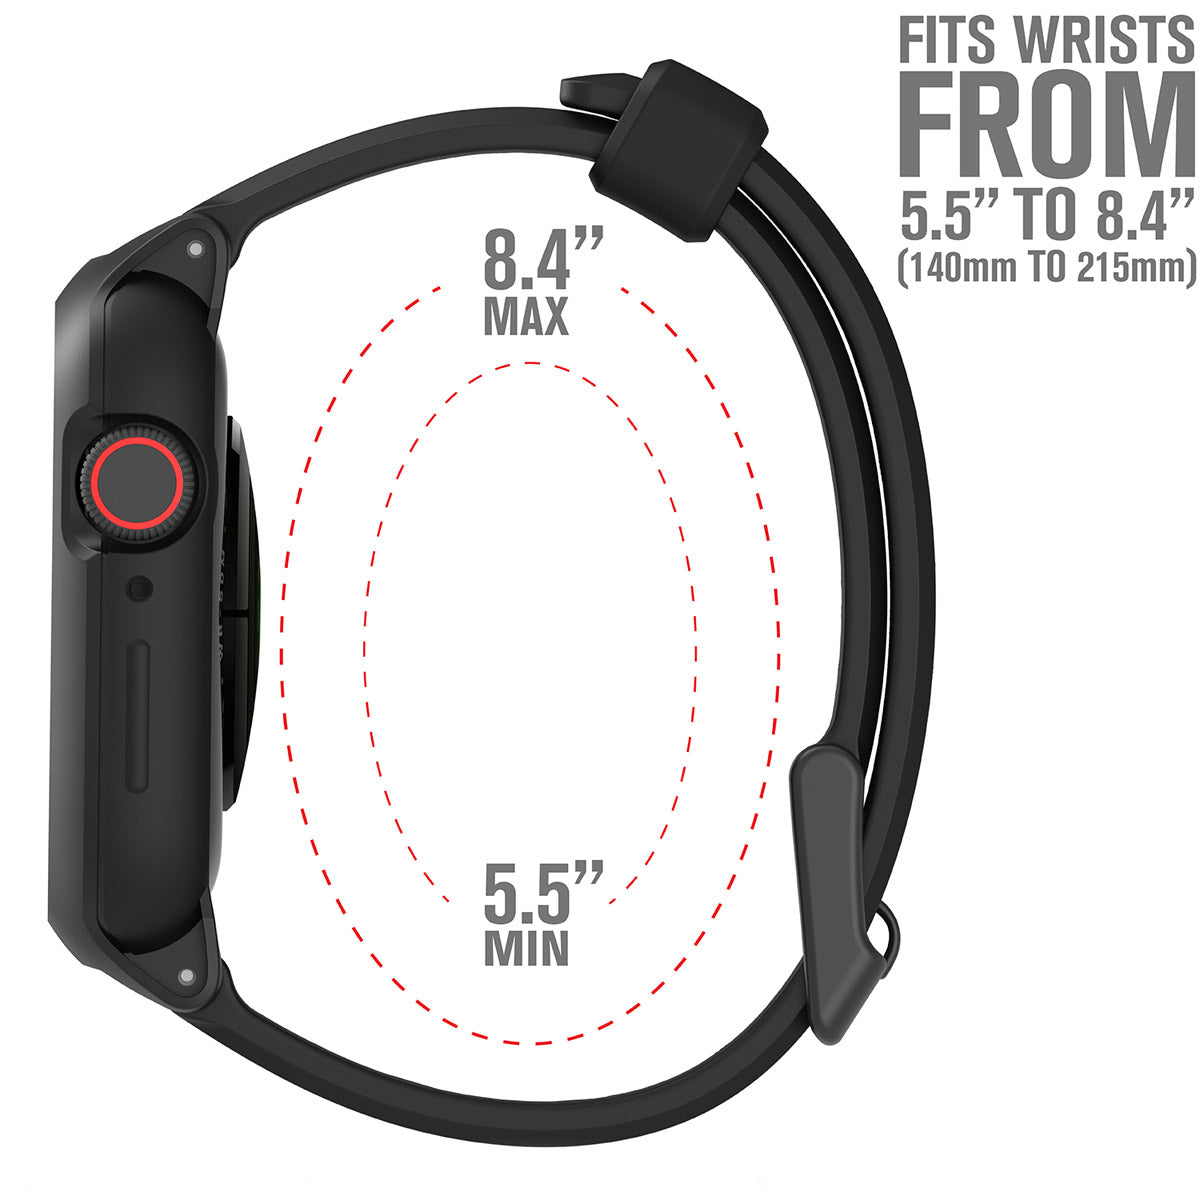 catalyst apple watch series 6 5 4 se gen 21 44mm 40mm impact protection case sport band stealth black side view of the catalyst case with the minimum and maximum sizes of the band text reads fits wrists from 5.5" to 8.4"(140mm to 215mm)